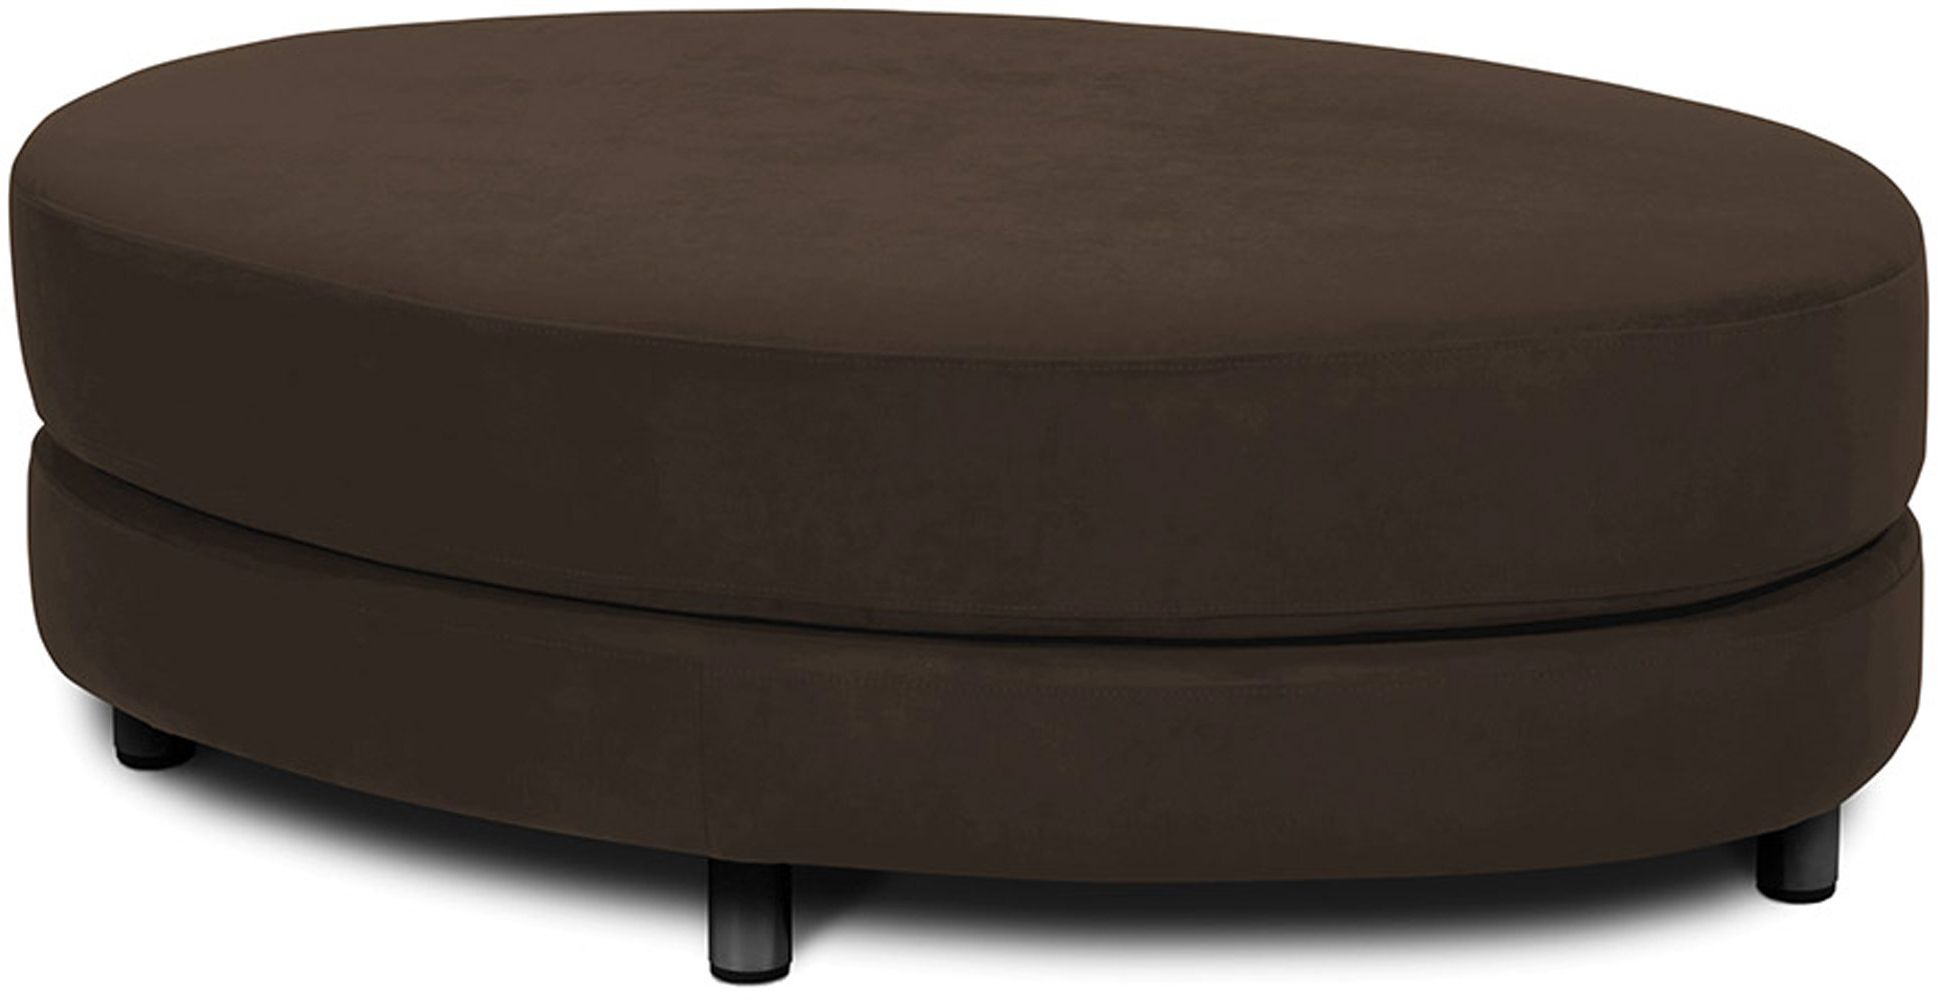 Gray Velvet Oval Ottomans Within Most Recent Roundabout Oval Ottoman Chocolate Velvet From The Benches Collection At (View 1 of 10)